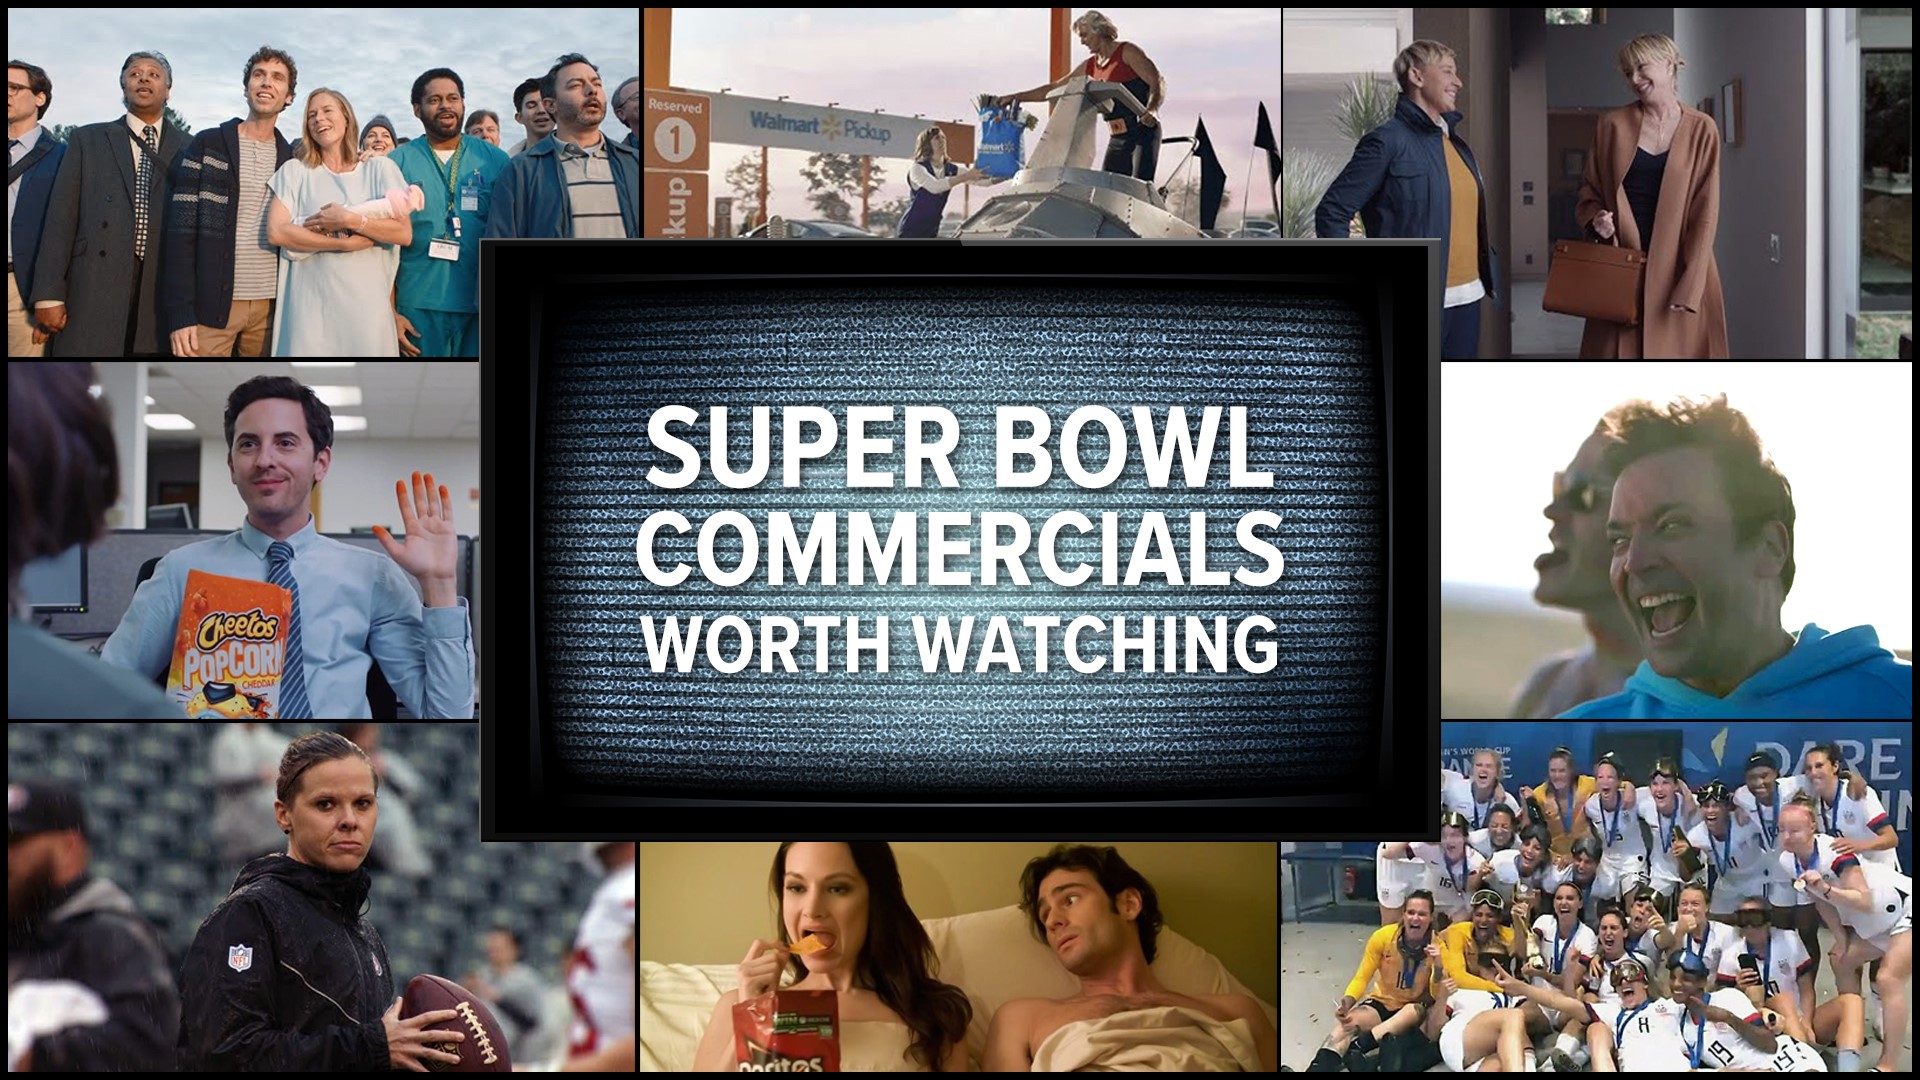 With as much as  Super Bowl ads cost, are they really worth the big bucks? Chris Rogers verifies.